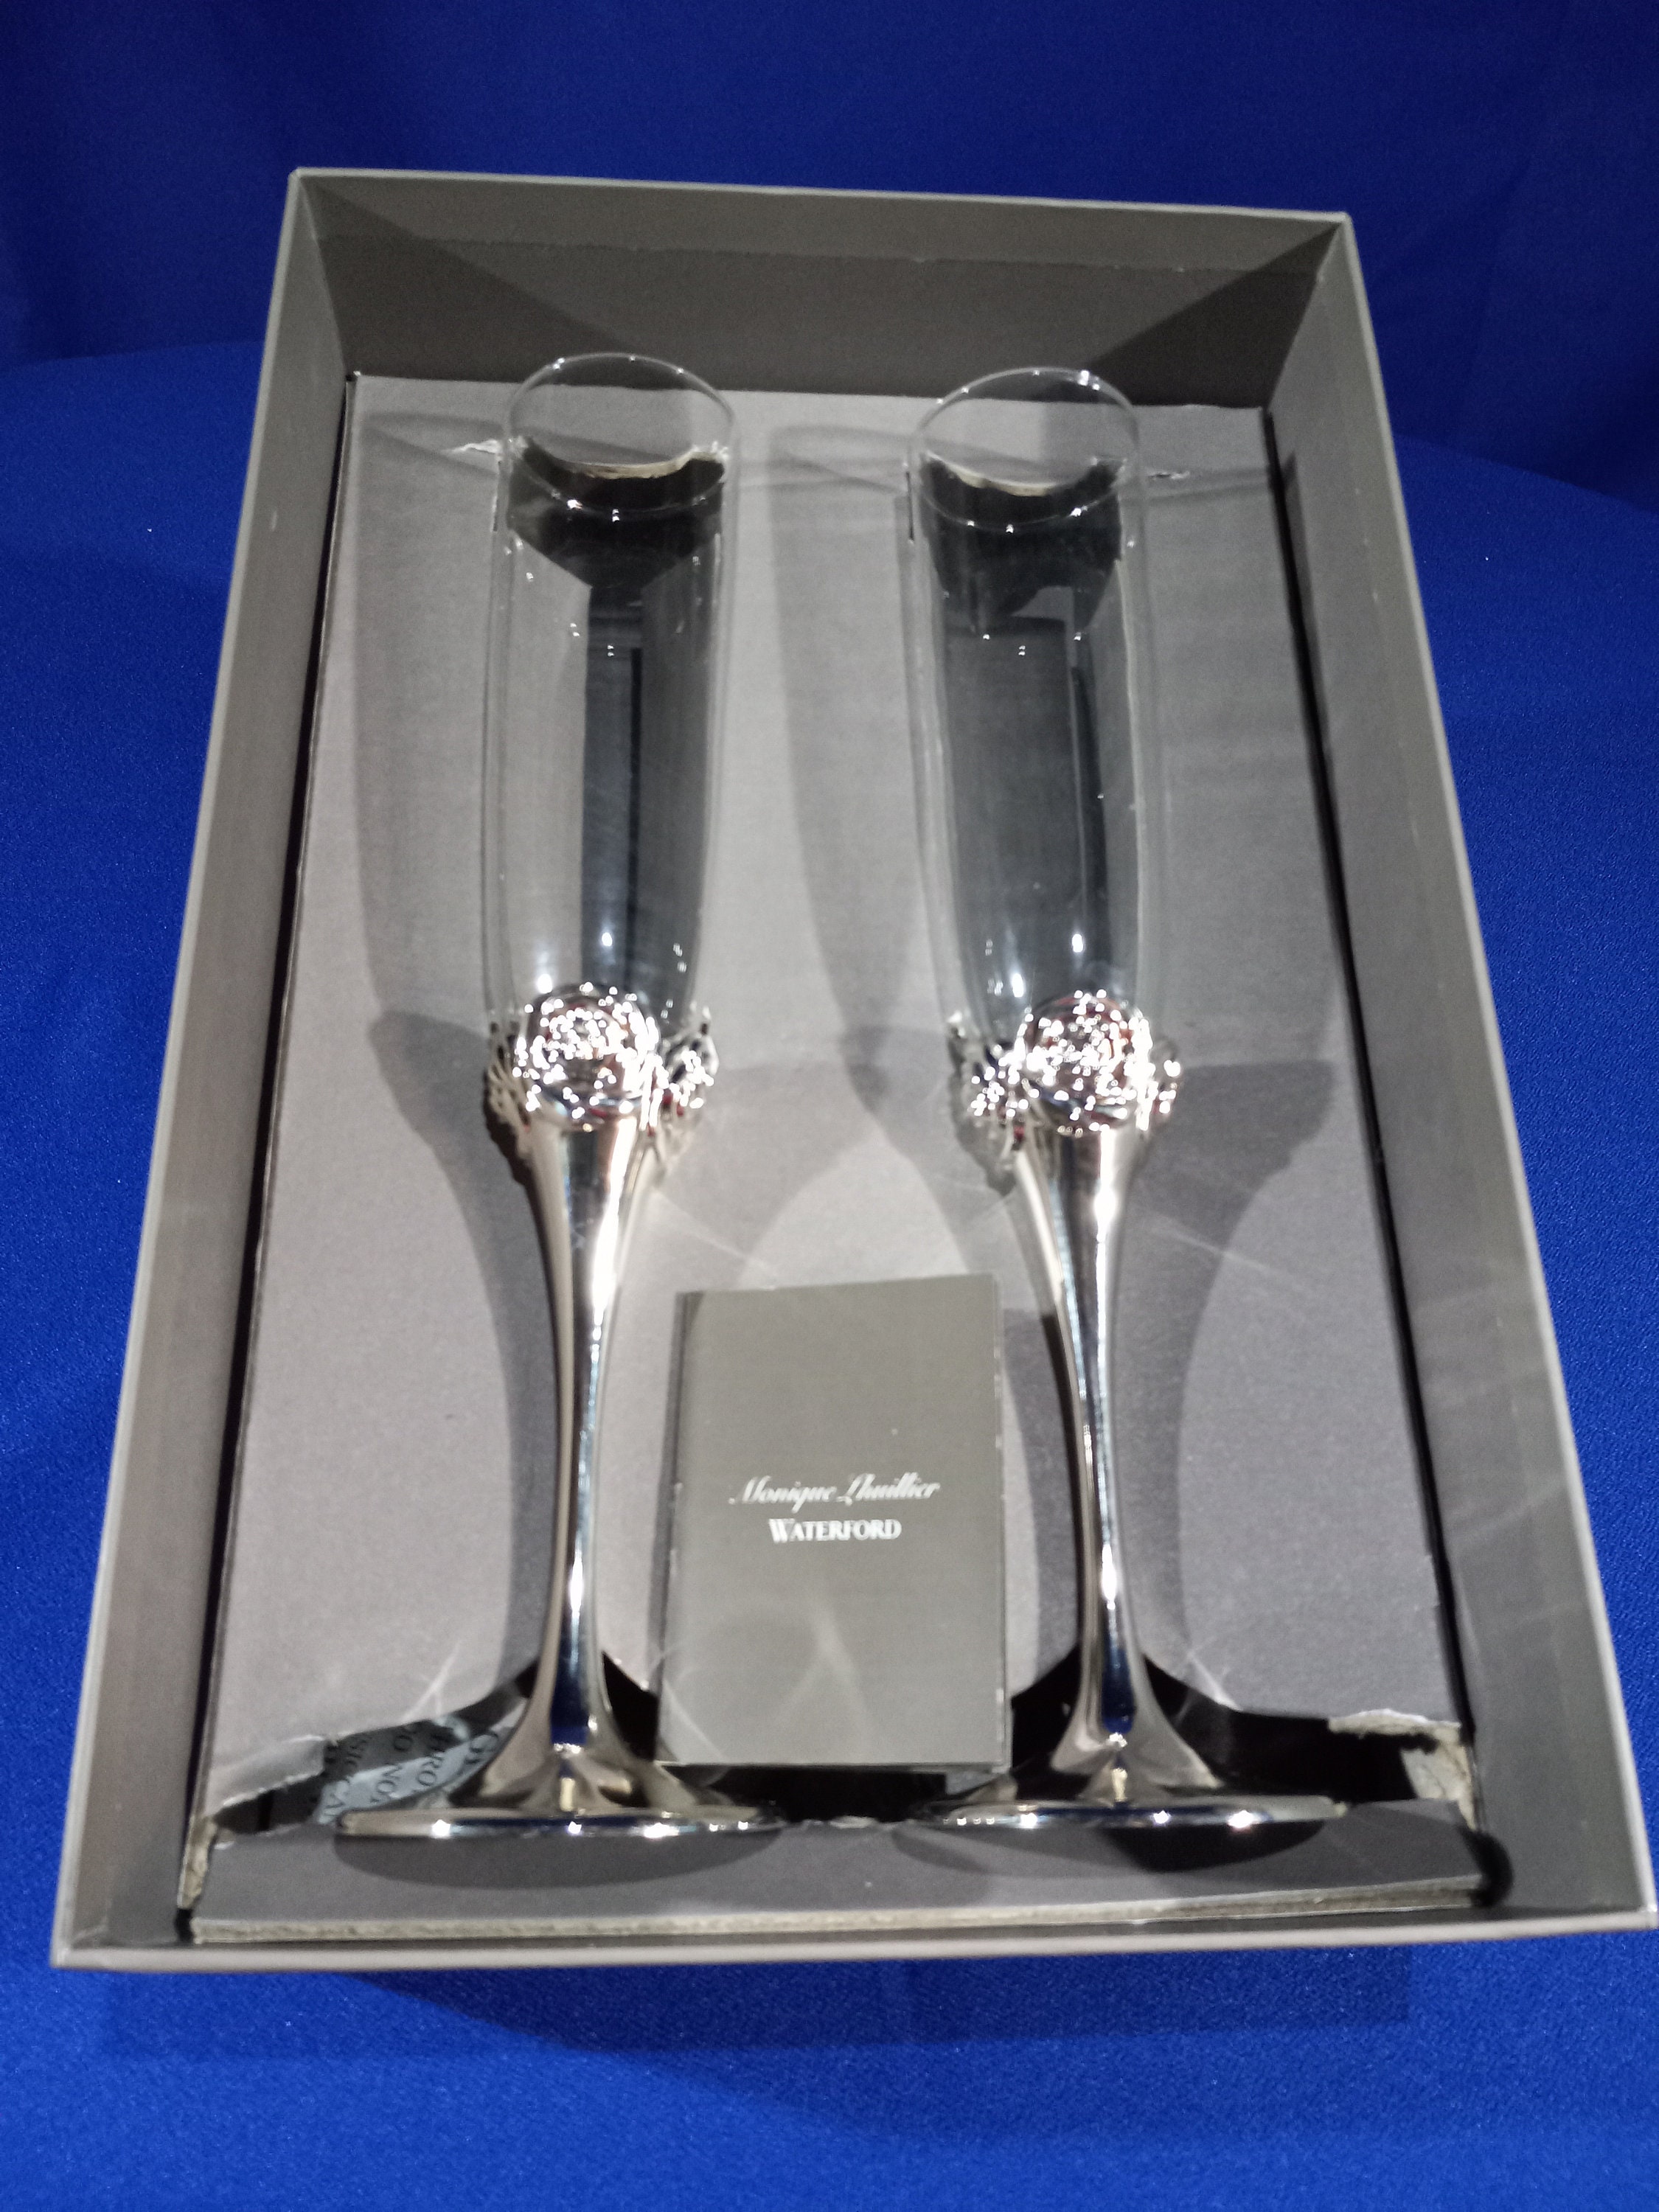 Monique Lhuillier Lily of the Valley Glass Champagne Flutes - Set